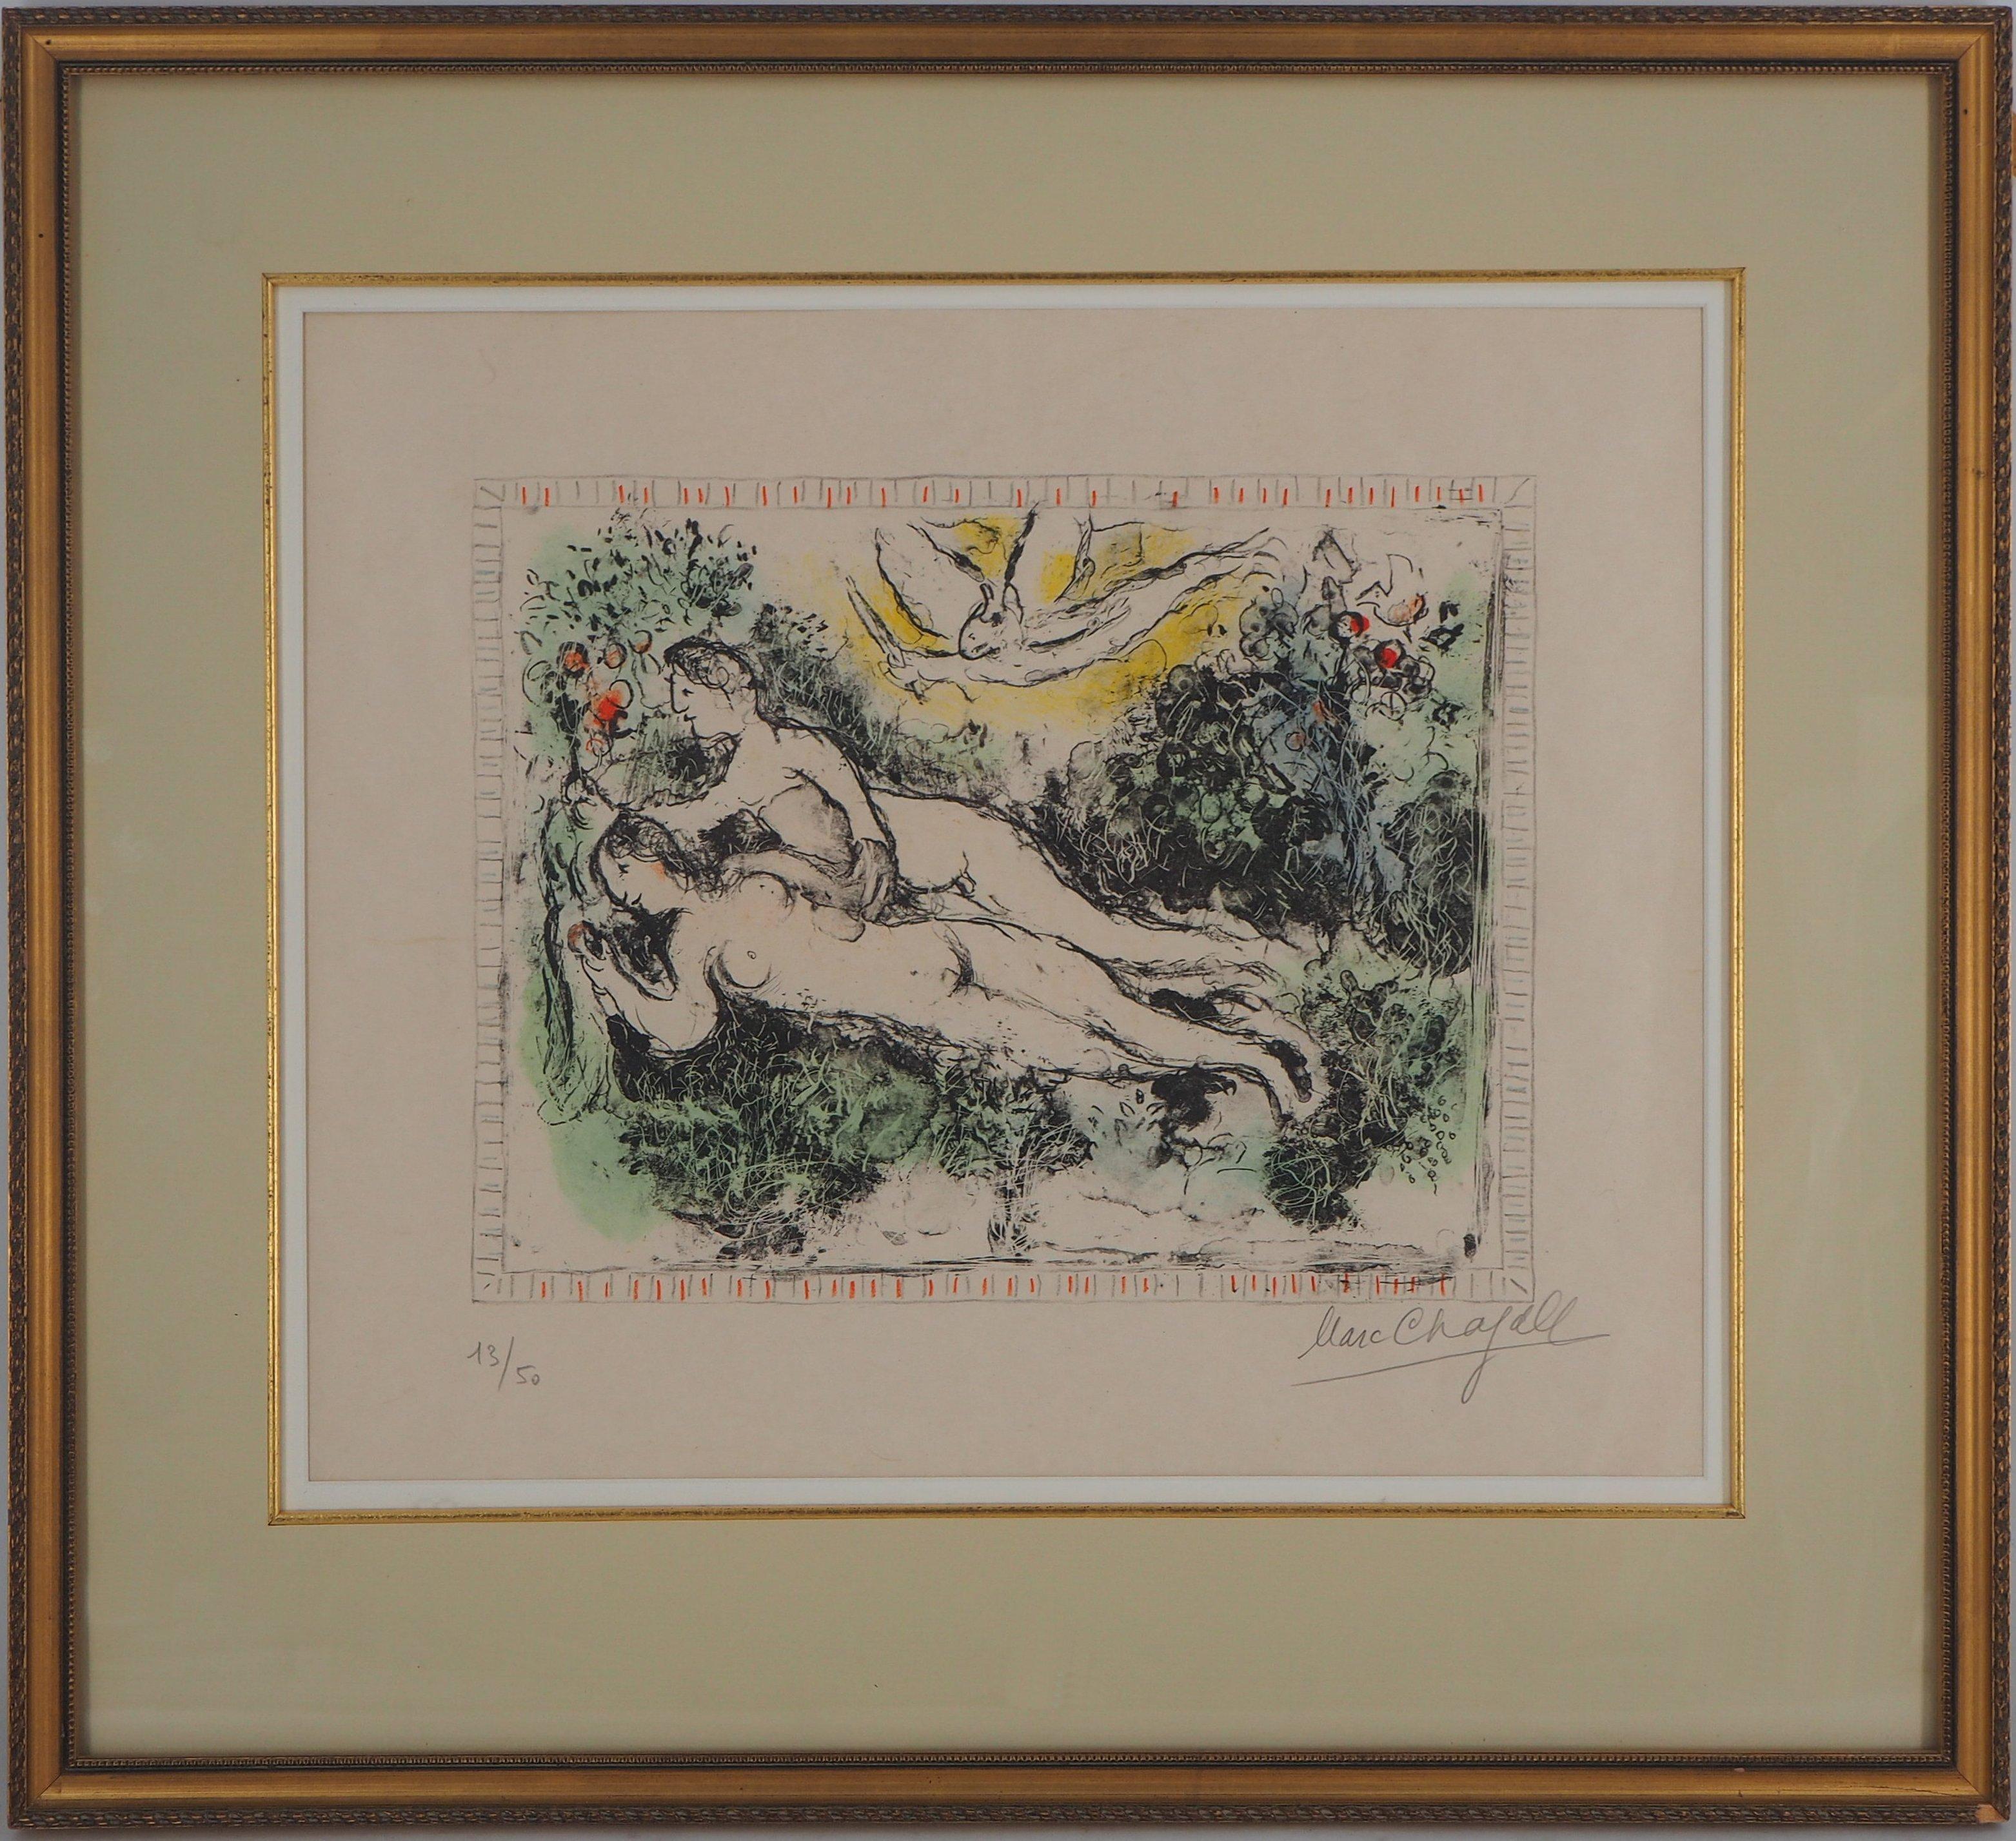 Marc Chagall Figurative Print - Lovers (Adam and Eve) - Original lithograph, Handsigned & Numbered /50 